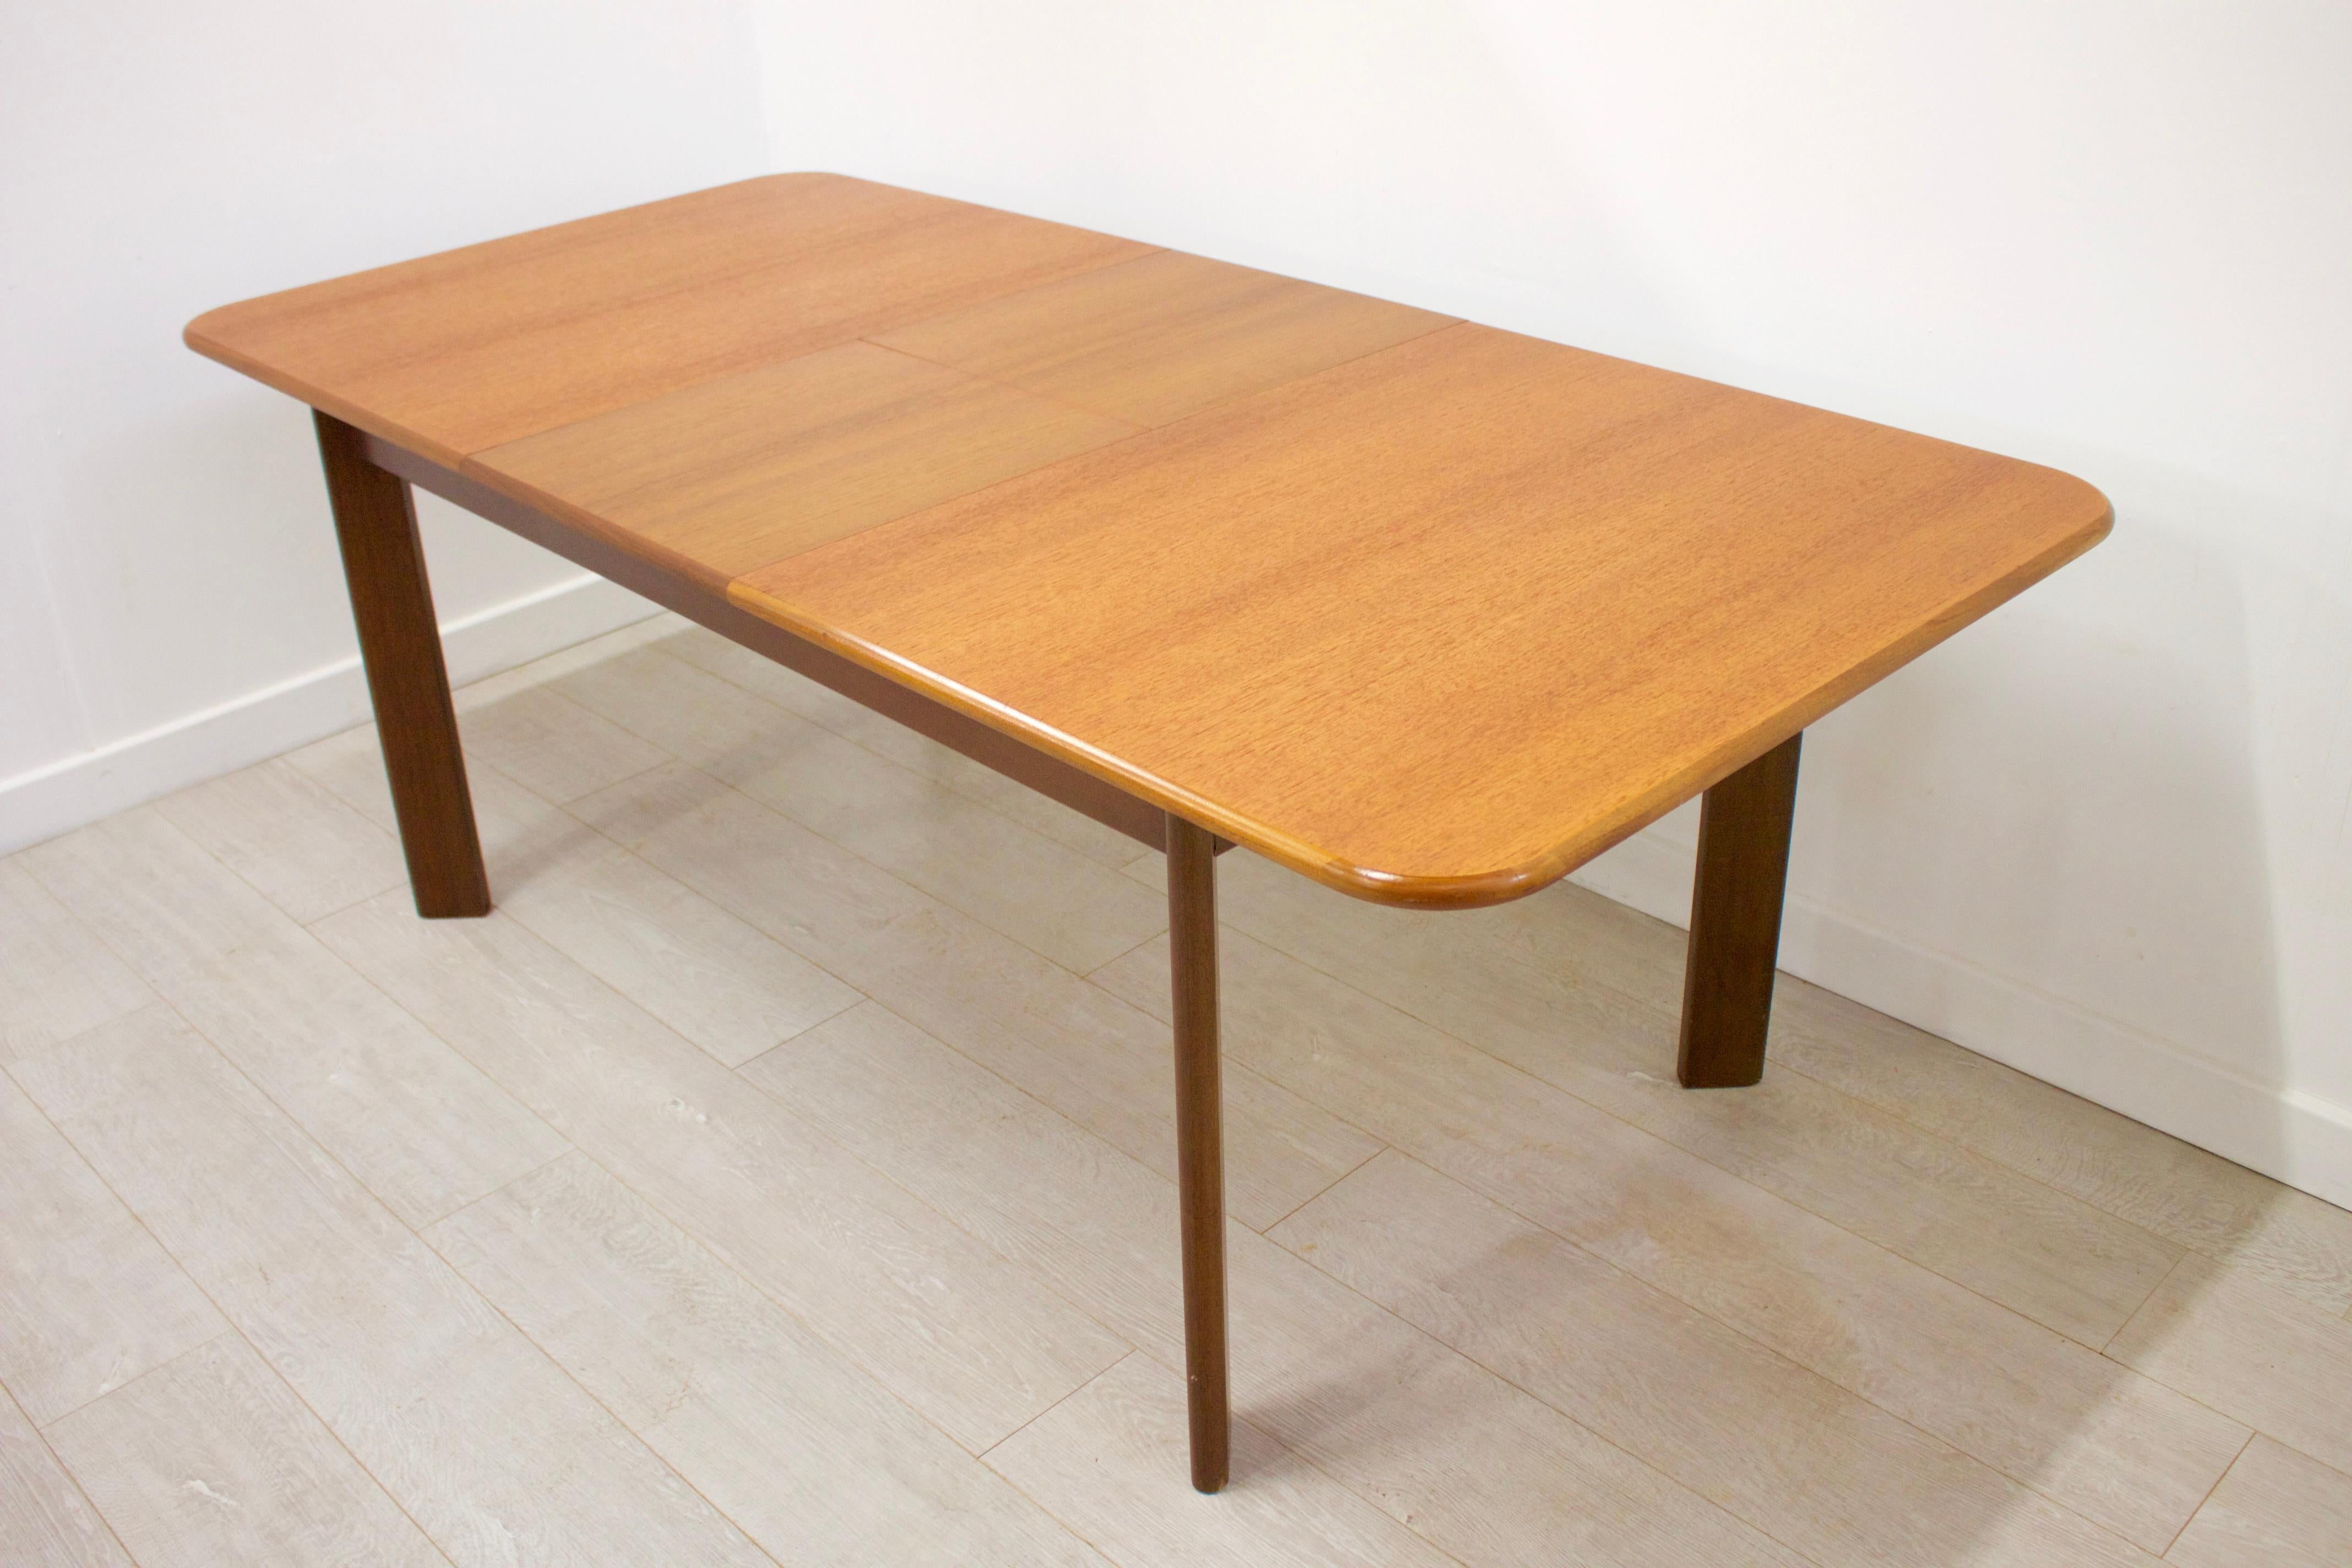 - Midcentury Teak extending dining table by G-Plan
- Made in the UK
- Extended width 195 cm.